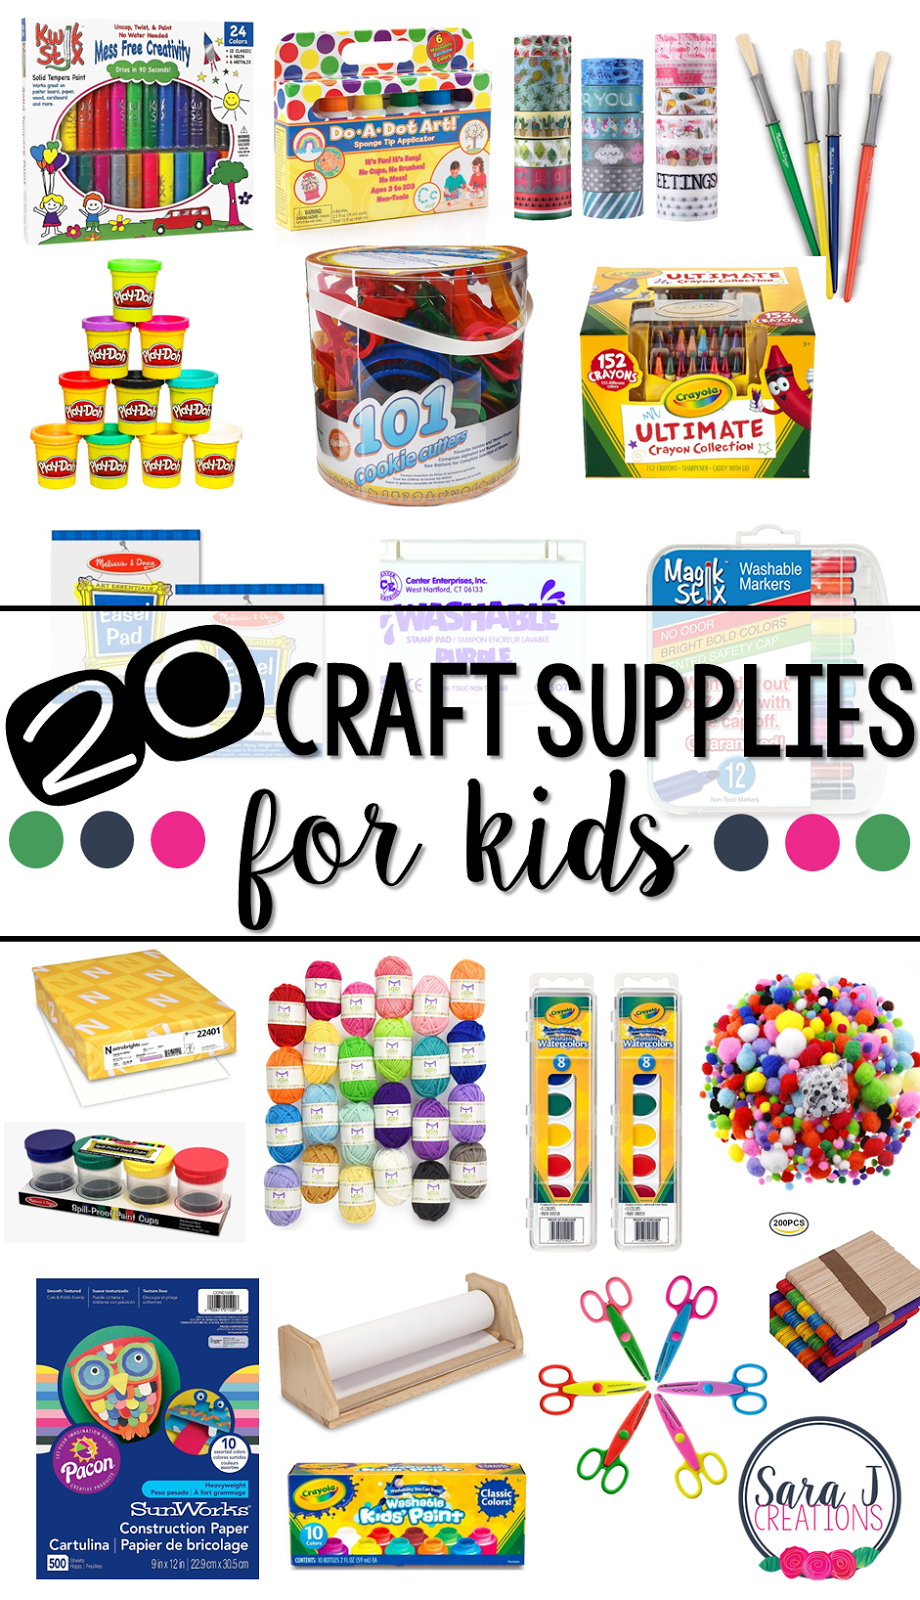 A showcase of our 20 favorite must have craft supplies for kids to be ready to make on the spot art projects. #artsupplies #craftsupplies #crafts #sarajcreations